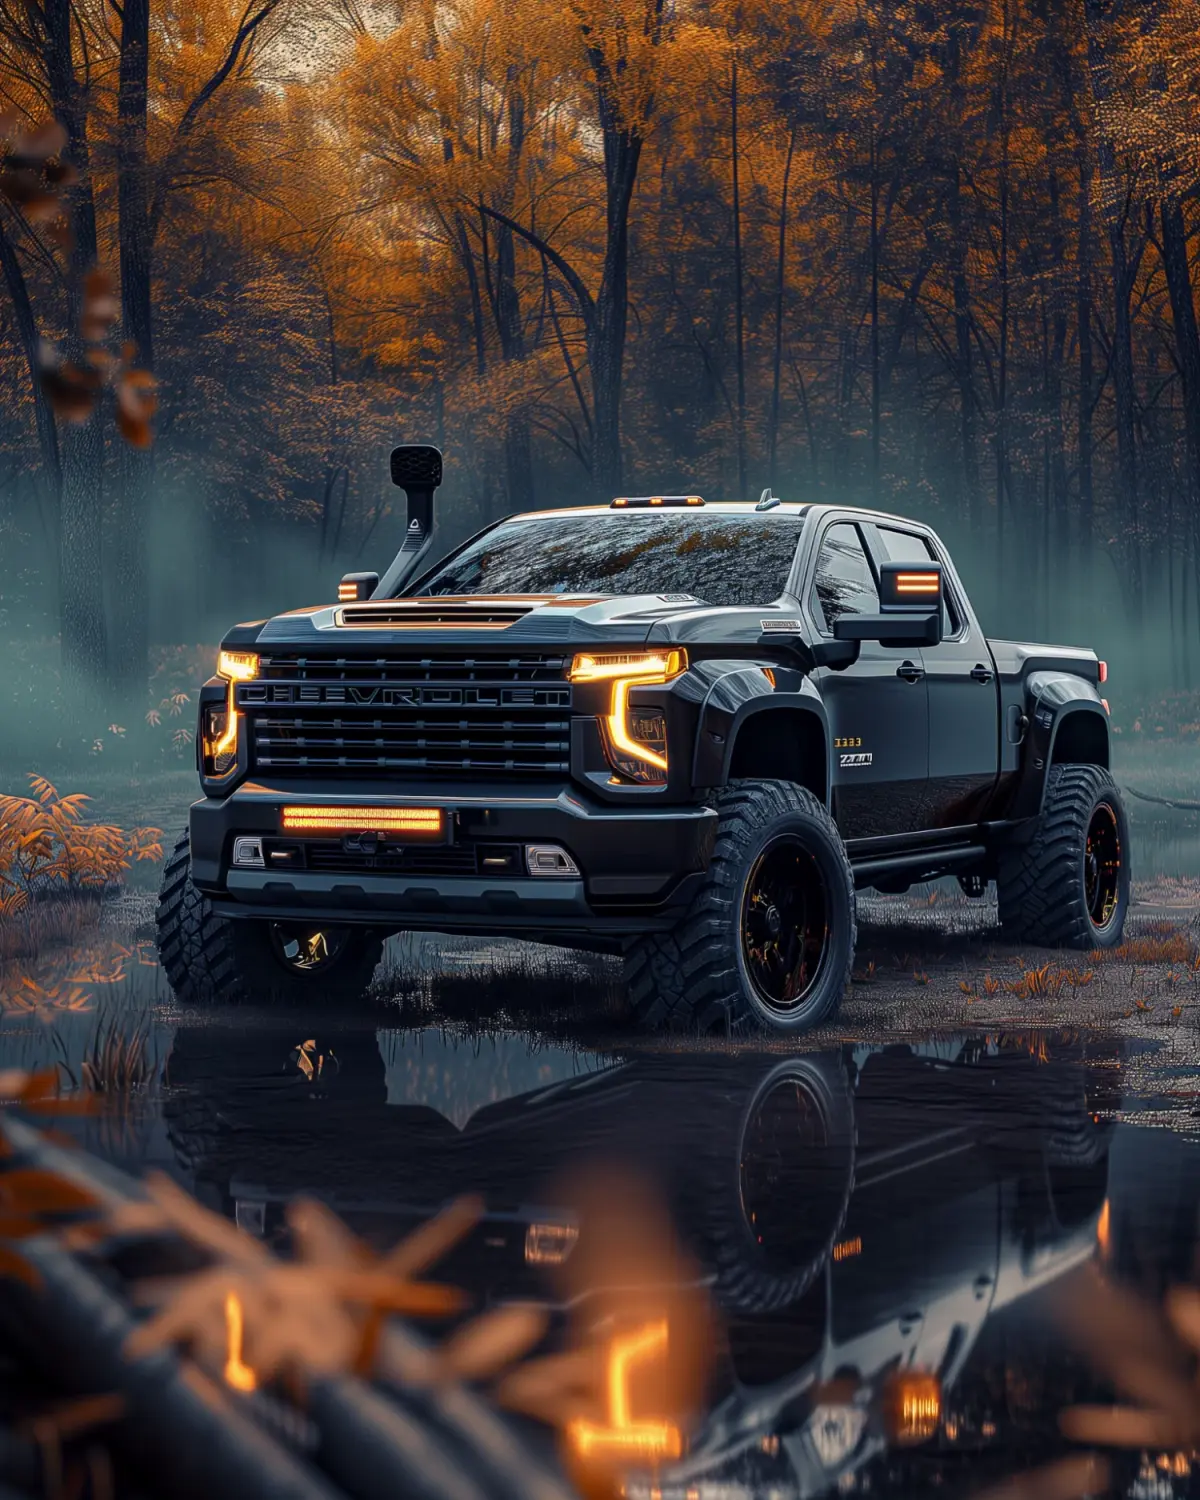 Off-road ready Chevrolet Silverado with a lift kit and snorkel on a challenging trail